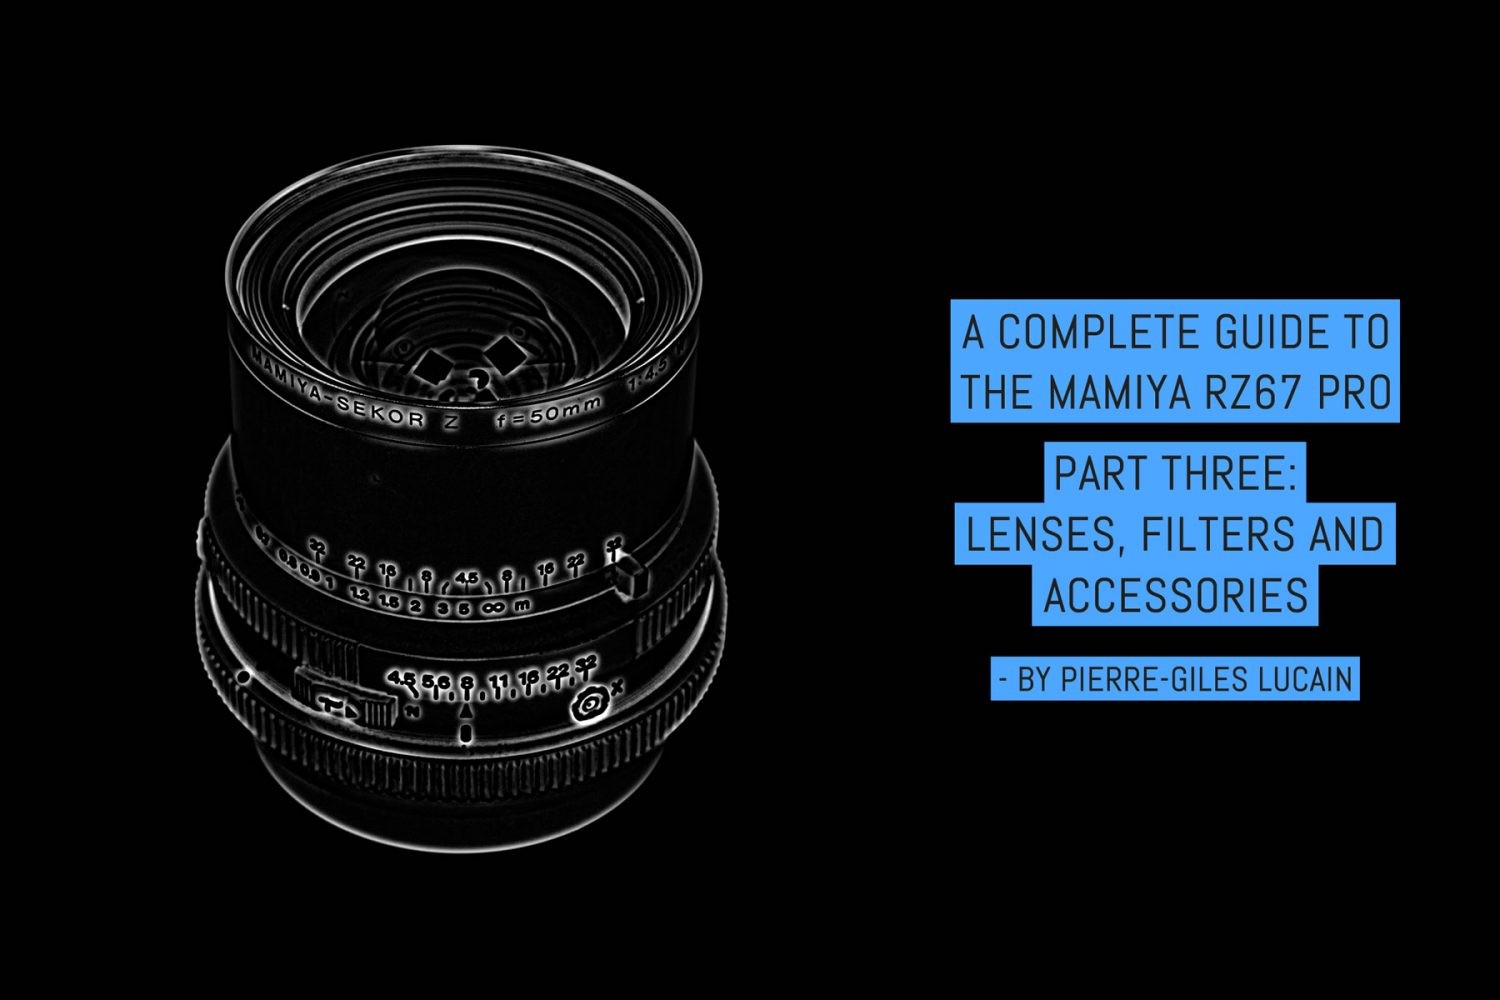 A complete guide to the Mamiya RZ67, part three: lenses, filters and accessories